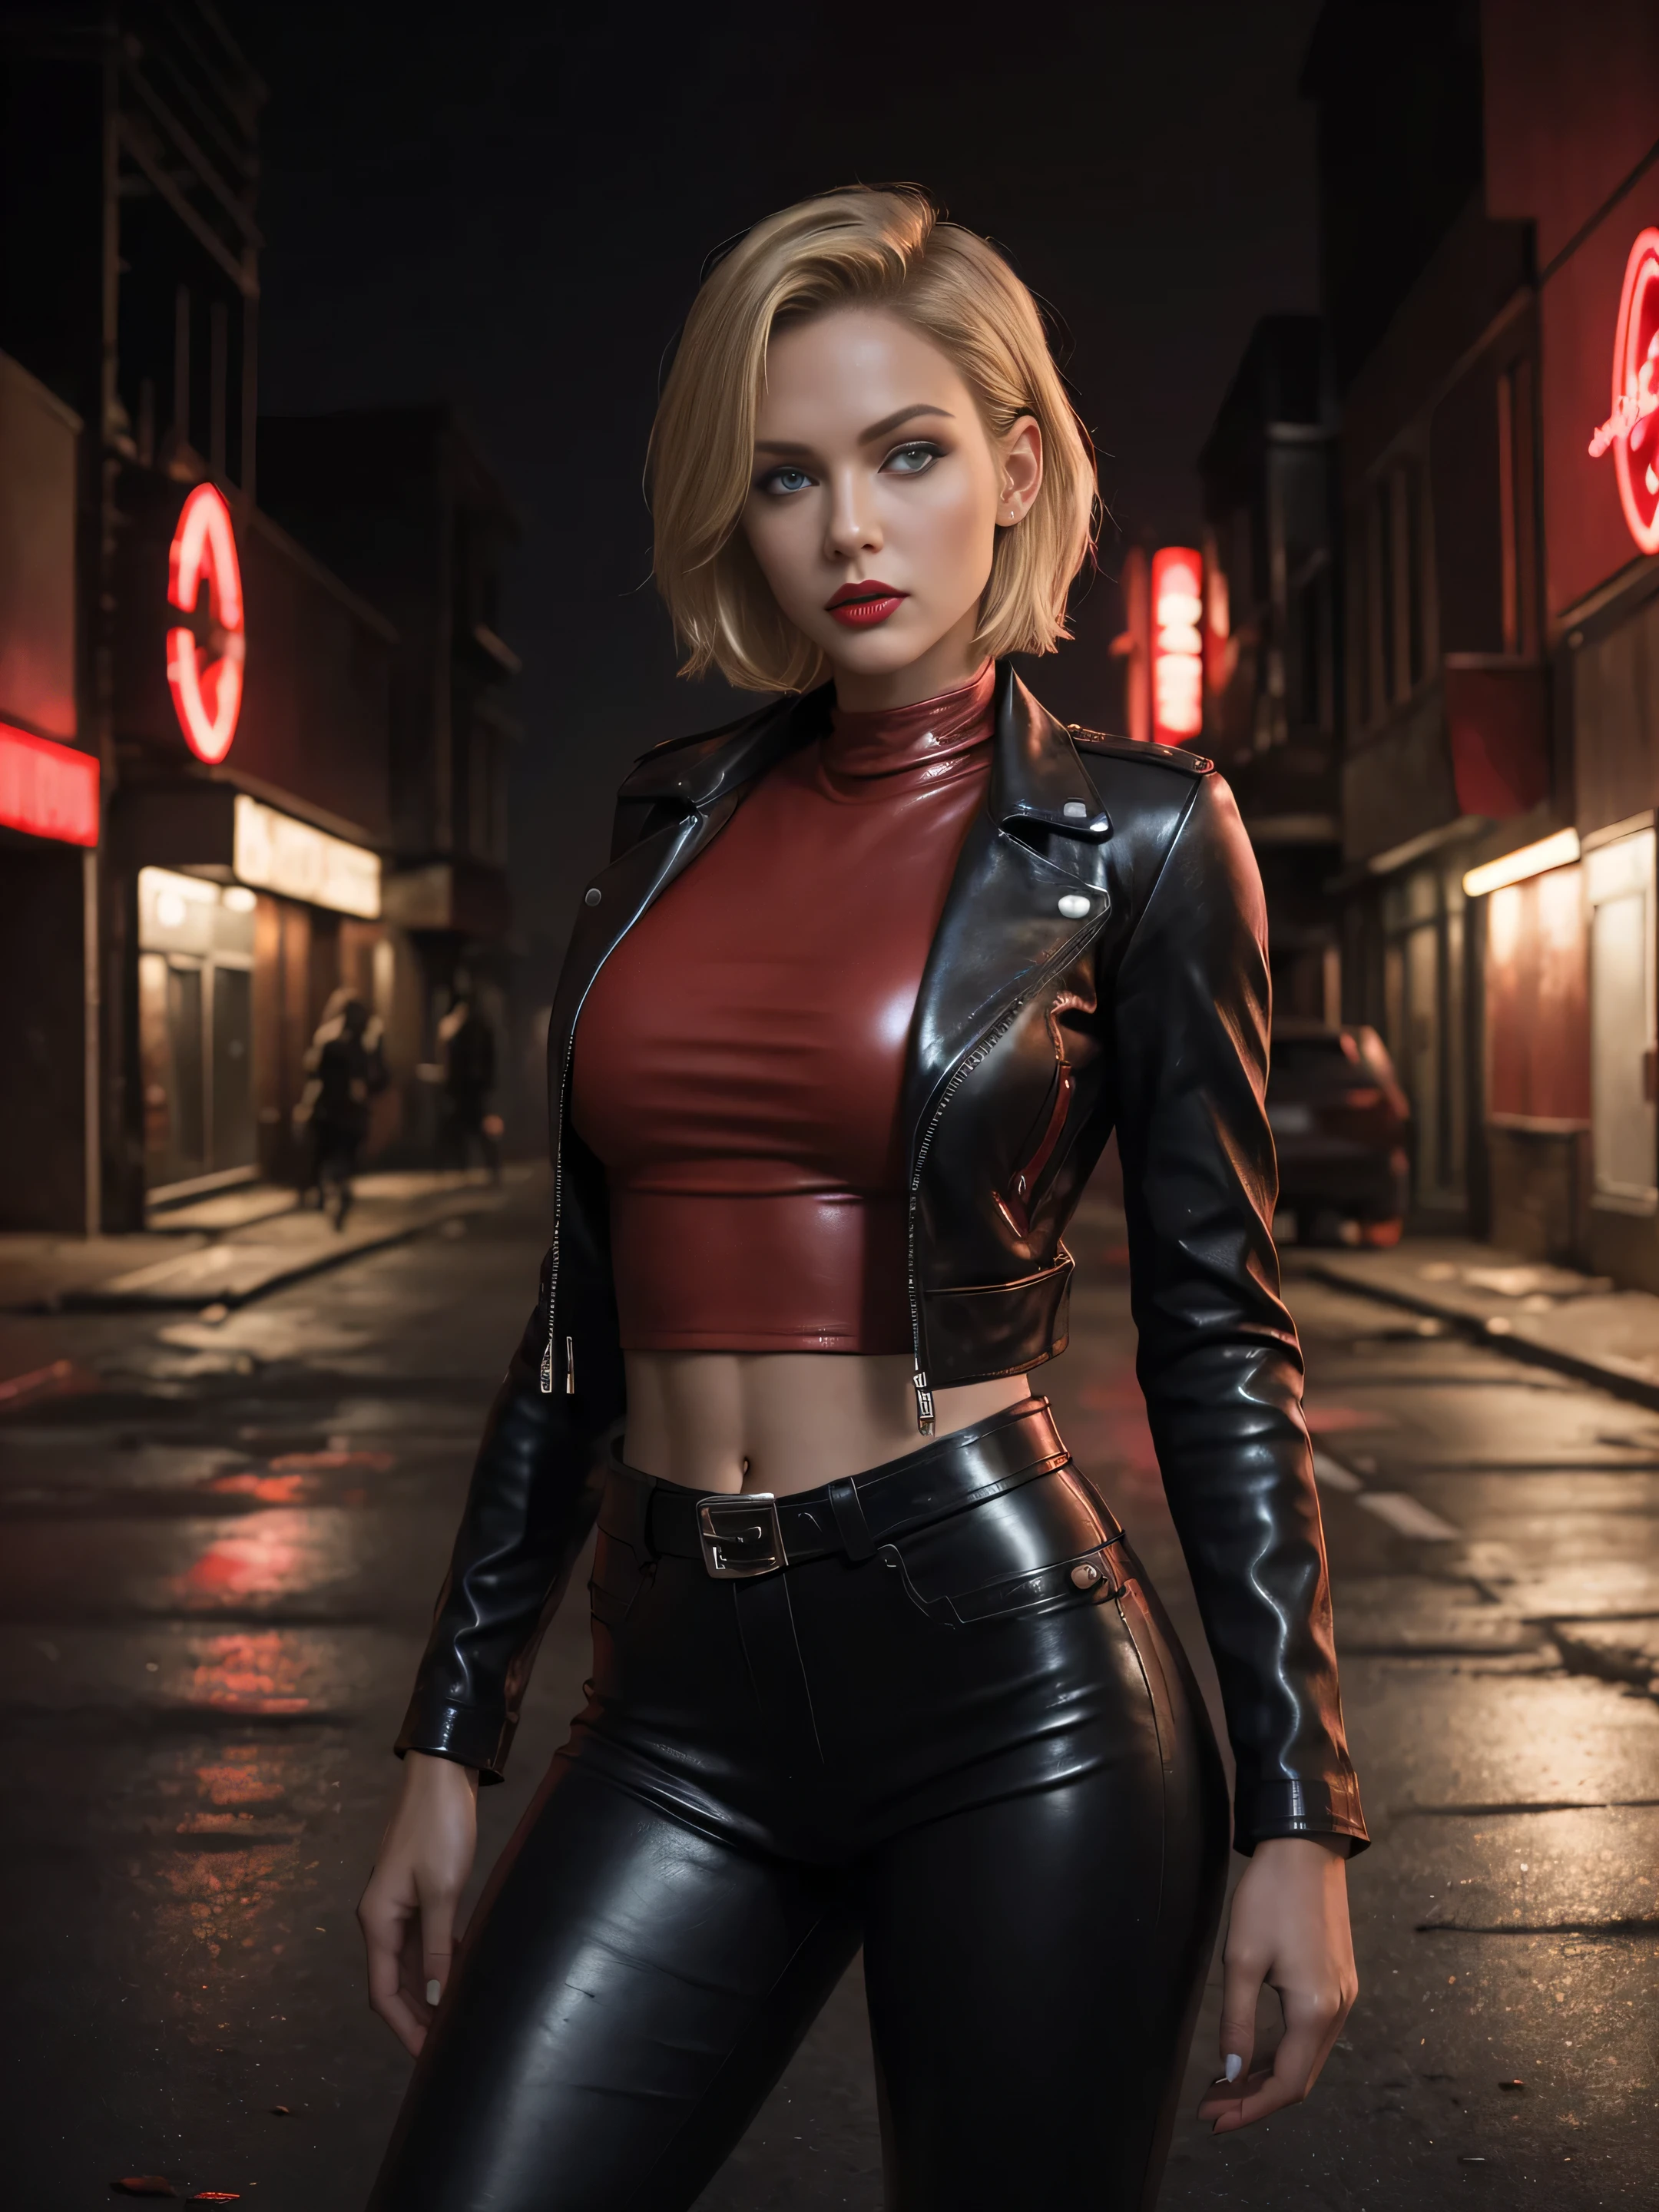 full length young beauty sexy envestigator girl , blonde very short hair, blue eyes, red lips, scowling expression, piercing gaze, wearing tight leather pants, tight leather jacket, in a red sleeveless t-shirt, leather boots, standing in a deserted post-apocalyptic small town street at night in the fog, faded dark colors